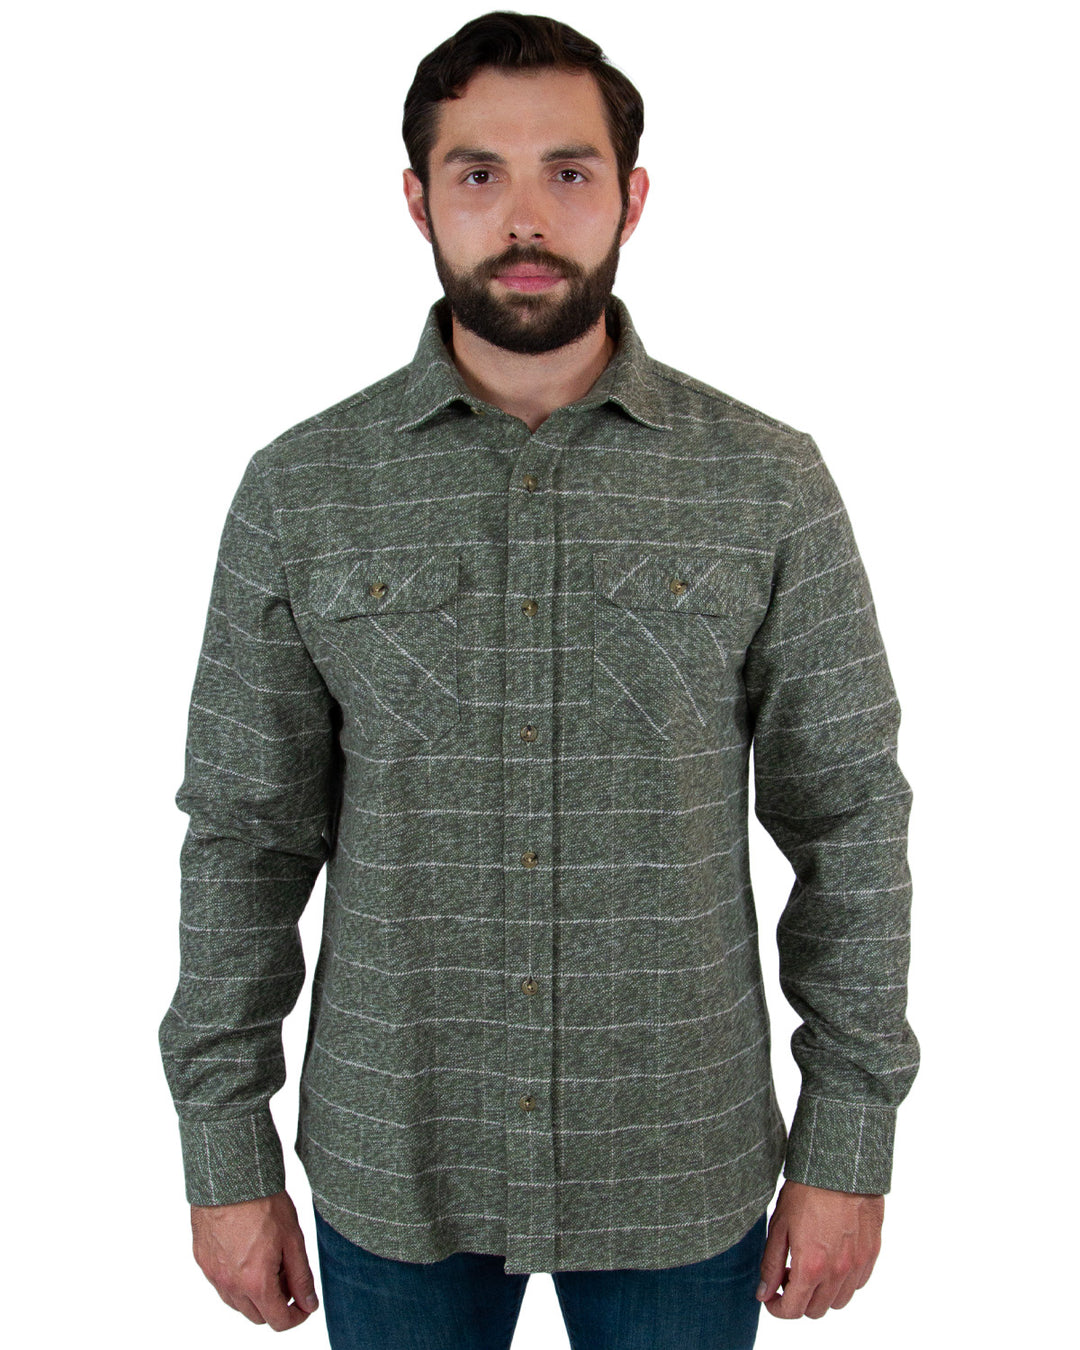 The Grand Flannel in Moss Green By MuskOx. Heavyweight Flannel. 